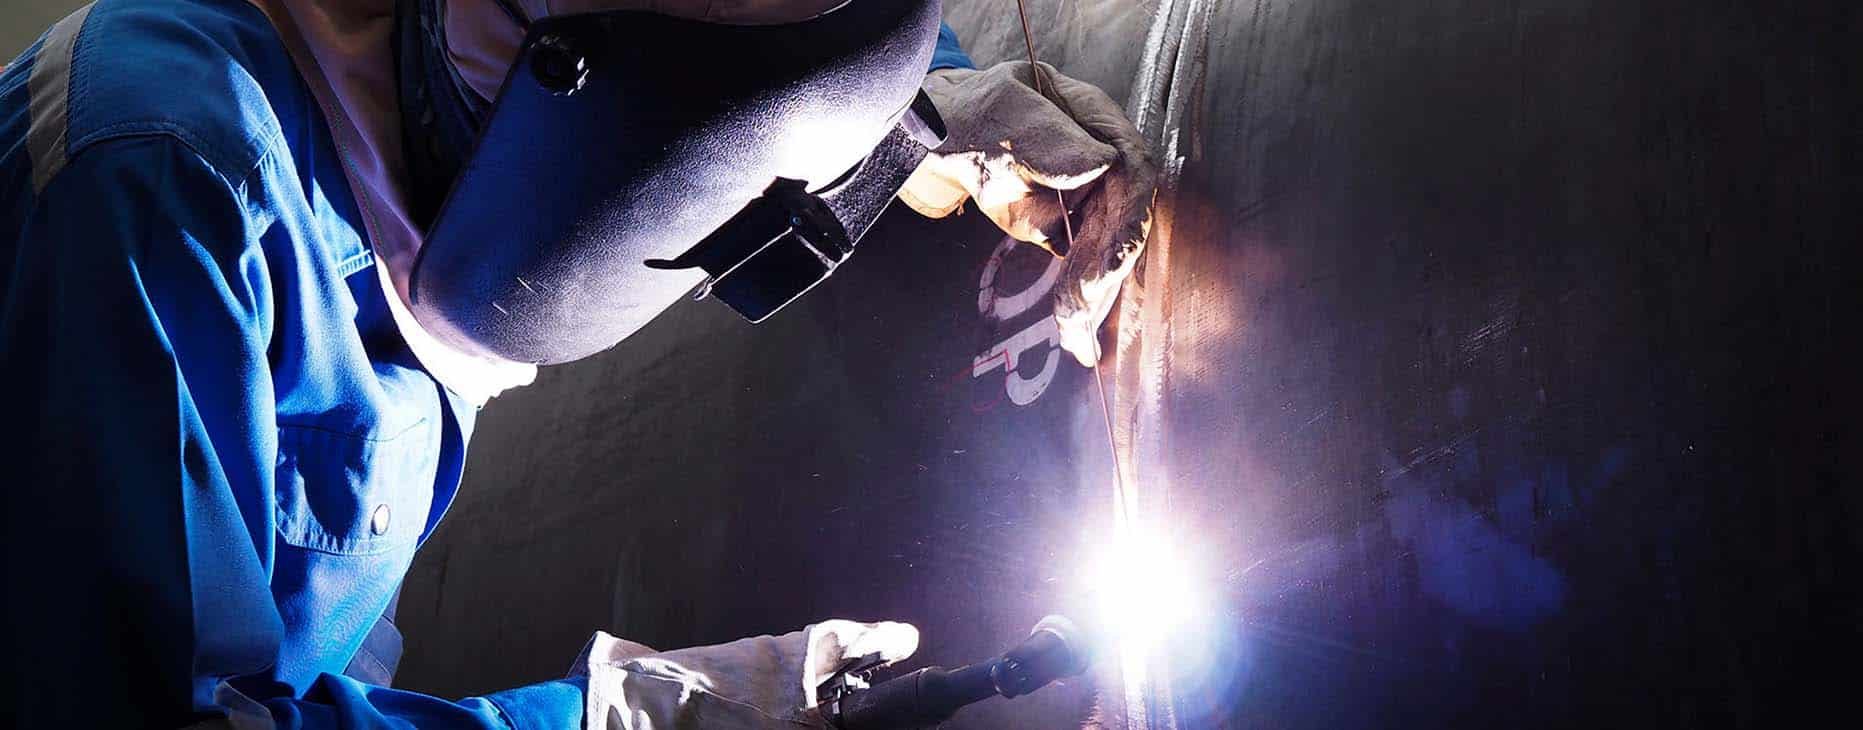 Skilled Welder Holding Electrode for Joining Metal Pieces — Fabrication & Engineering in Mackay, QLD